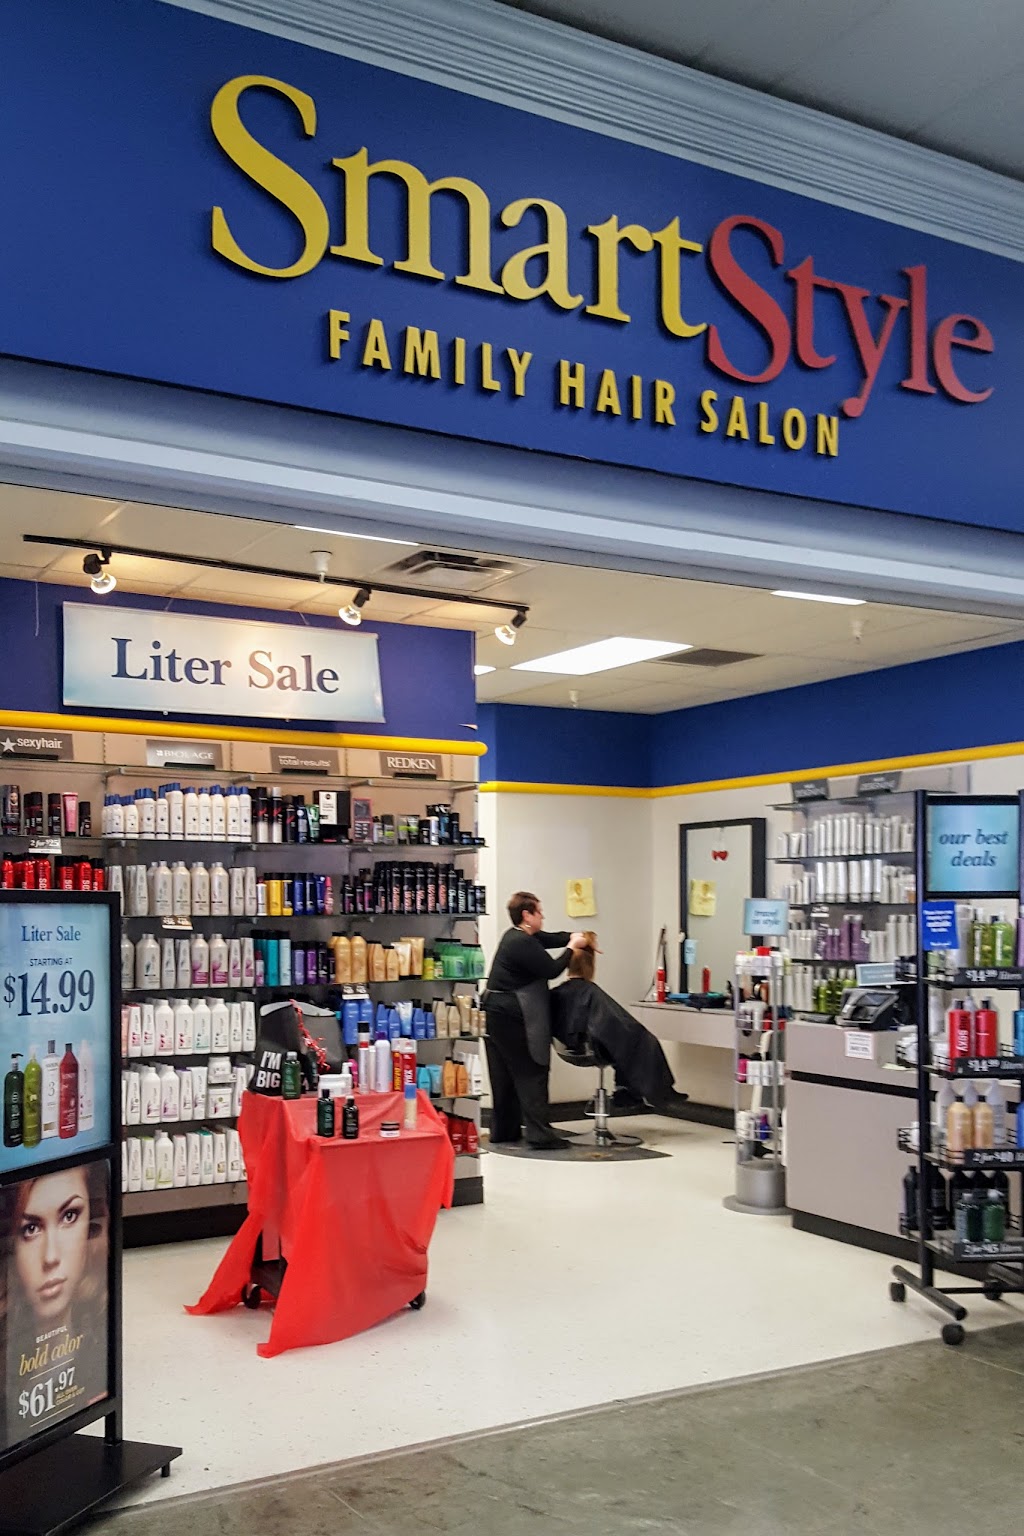 SmartStyle Hair Salon | 220 Route 6 And 120 Located Inside Walmart #2064, Milford, PA 18337 | Phone: (570) 491-2164